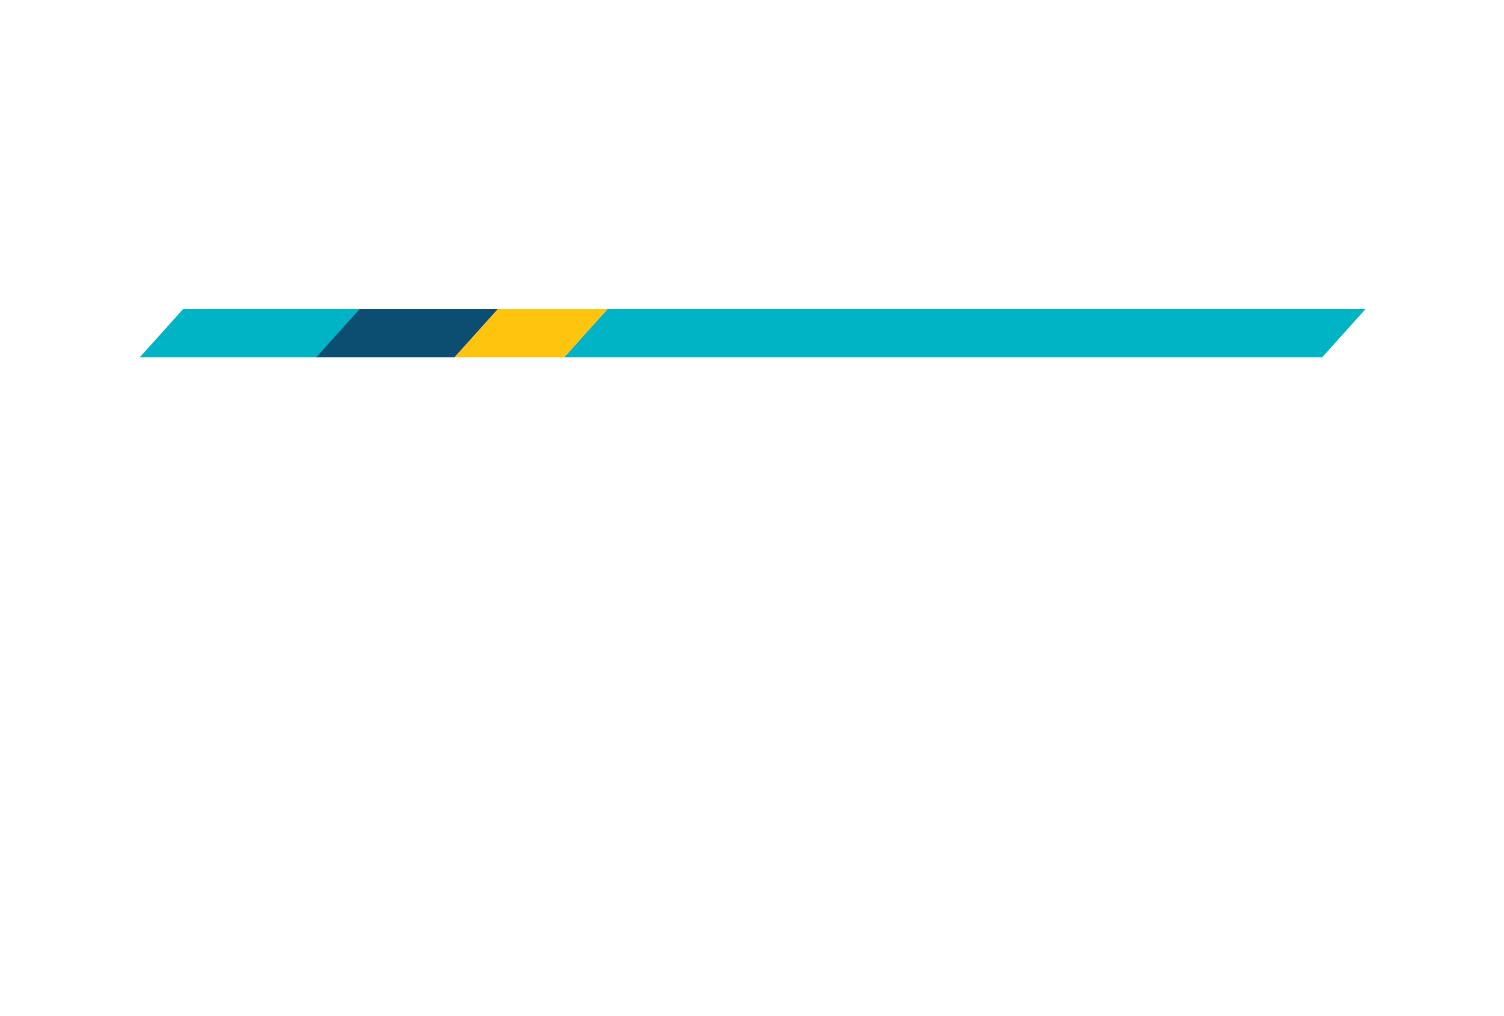 Supported by Travel Wisconsin